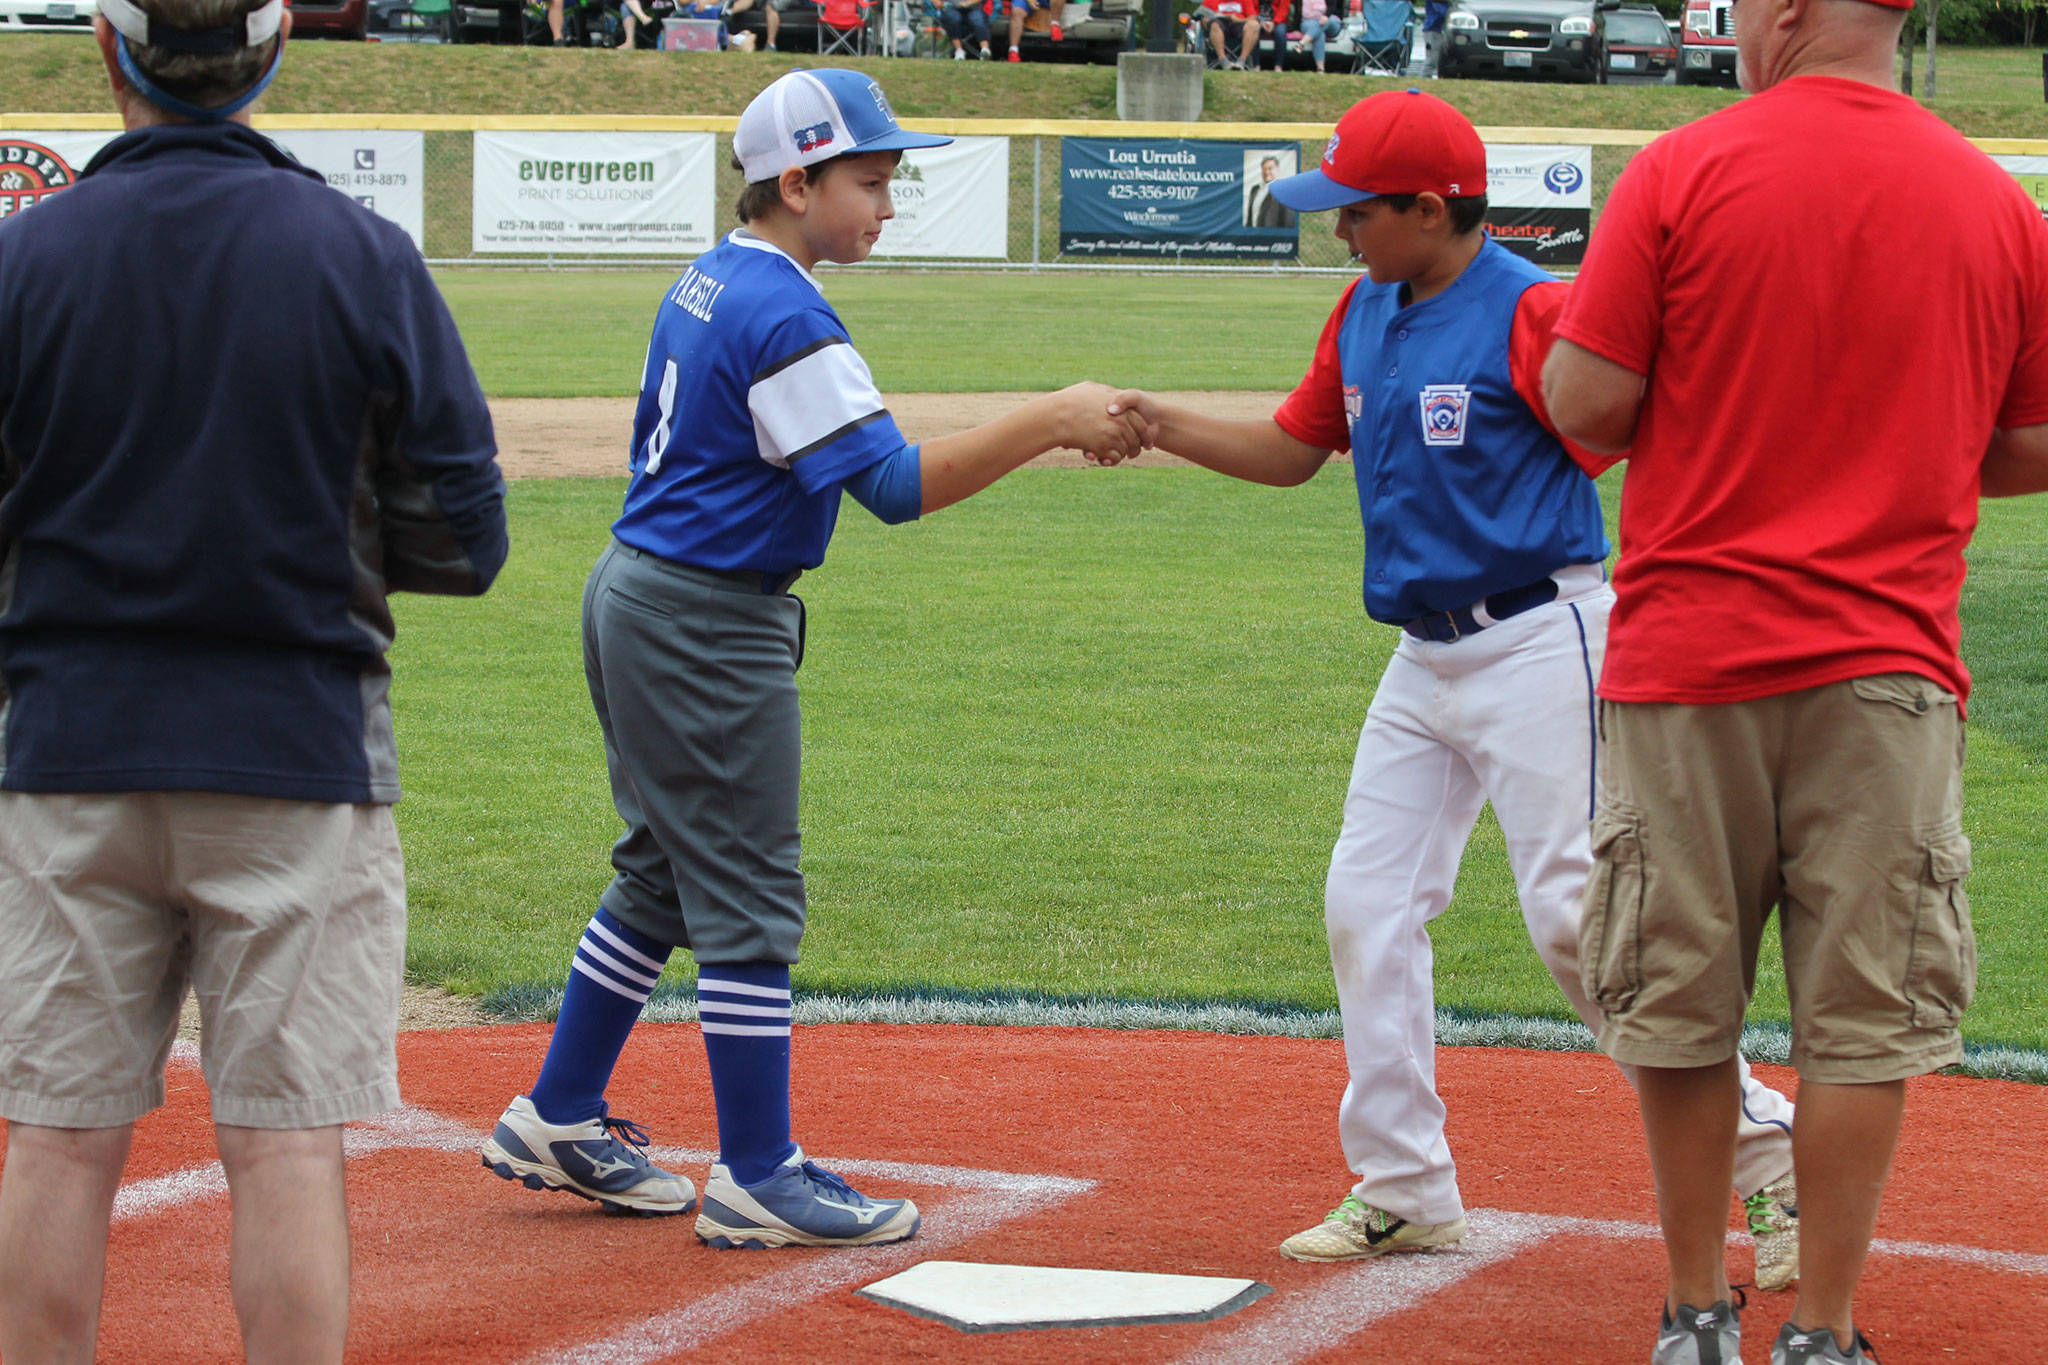 South Whidbey’s Kasen Parsell, left, shakes hands with a Richland player during the pre-game introductions.(Photo by Jim Waller/South Whidbey Record)